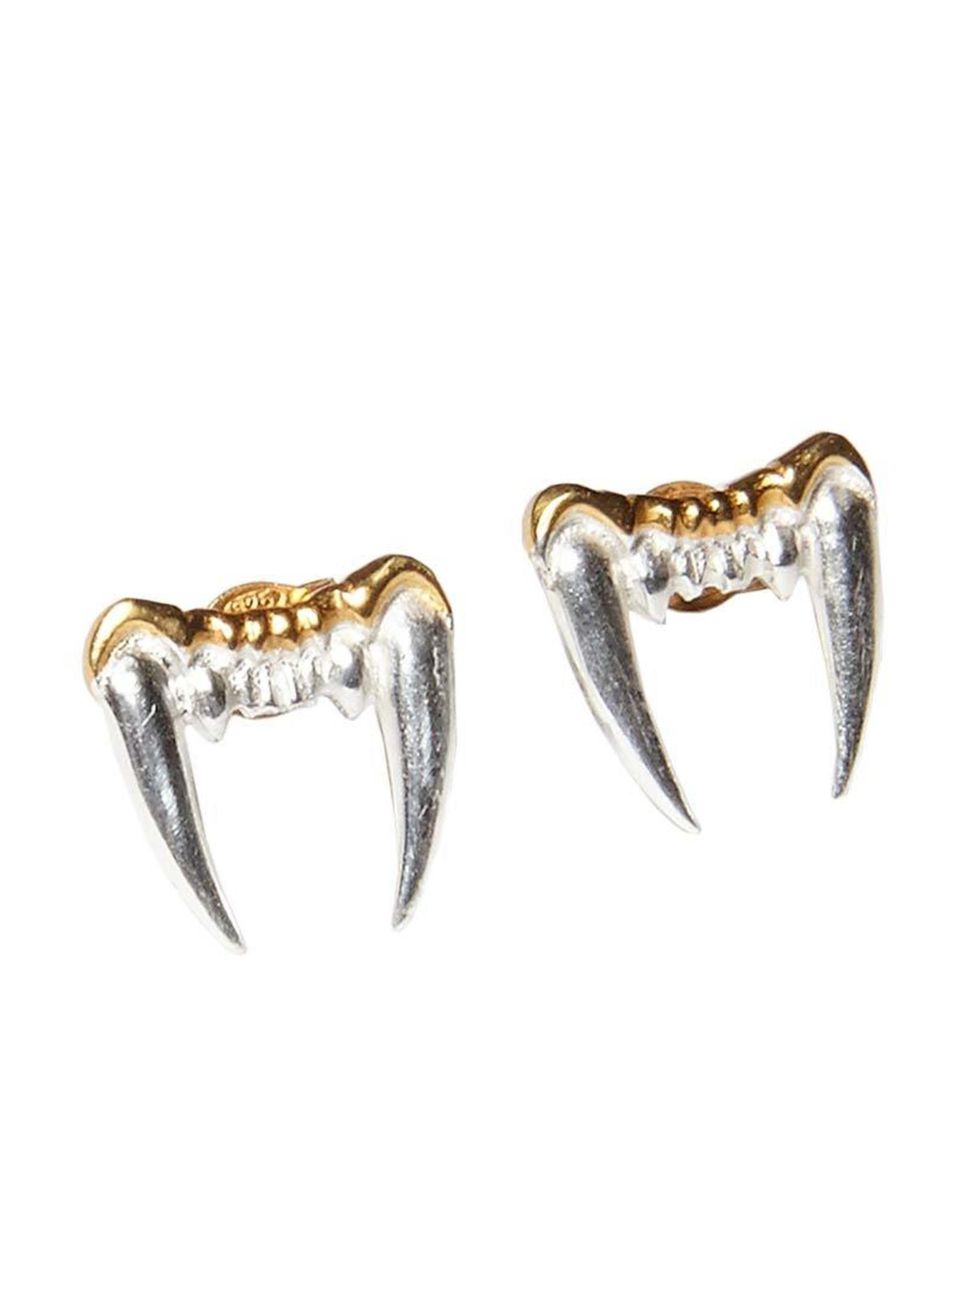 <p>Content Editor Leisa Barnett couldn't resist these polished fangs.</p>

<p><a href="http://creaturejewellery.com/shop/tiger-teeth-earrings/" target="_blank">Creature</a> earrings, £60</p>